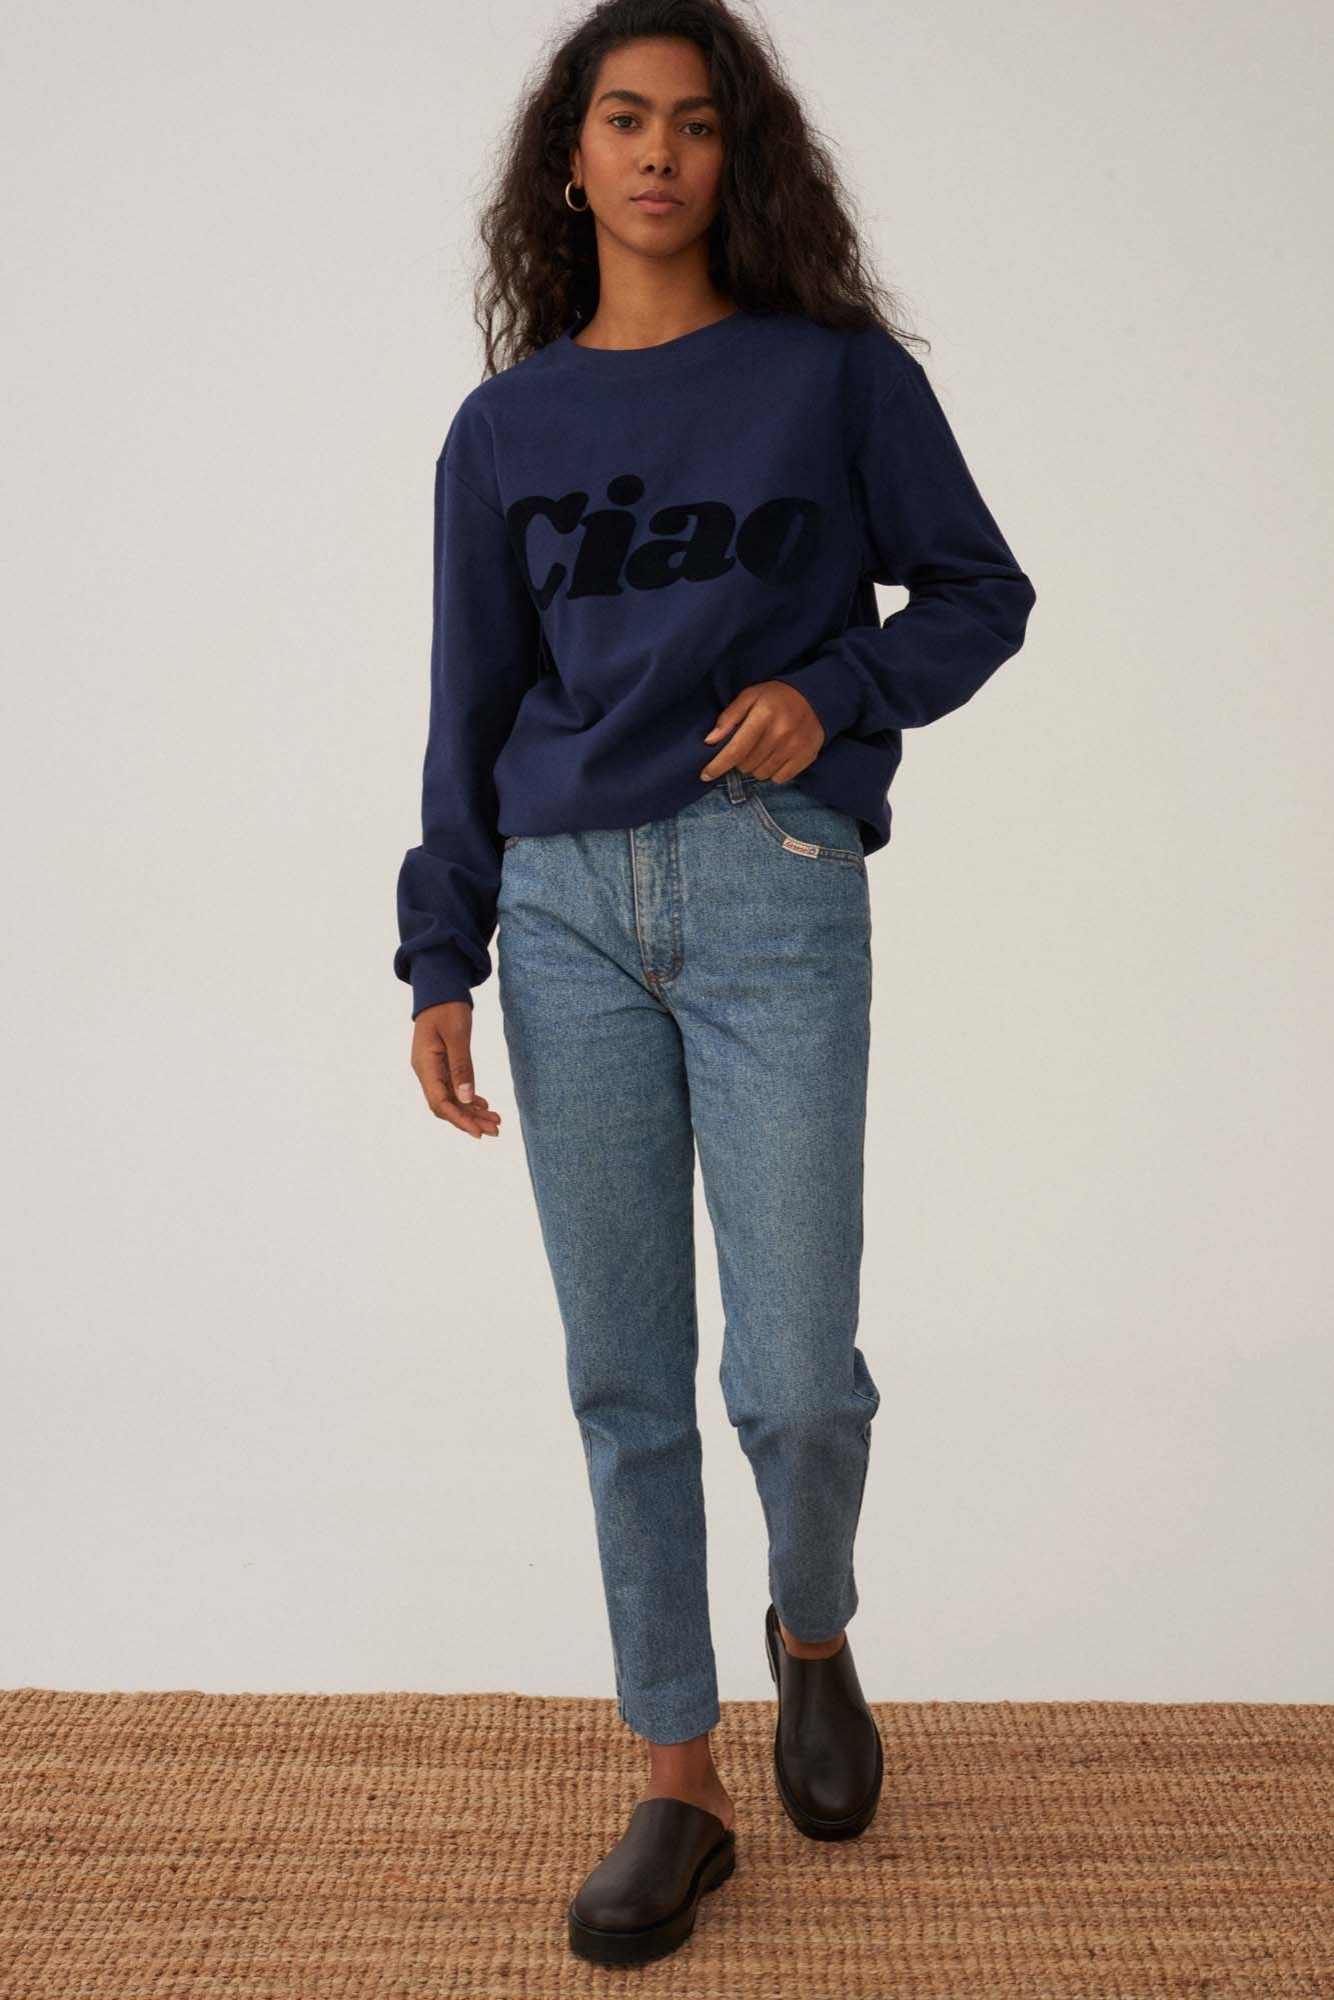 Les Goodies - She Is Sunday Ciao Sweatshirt Navy Blue